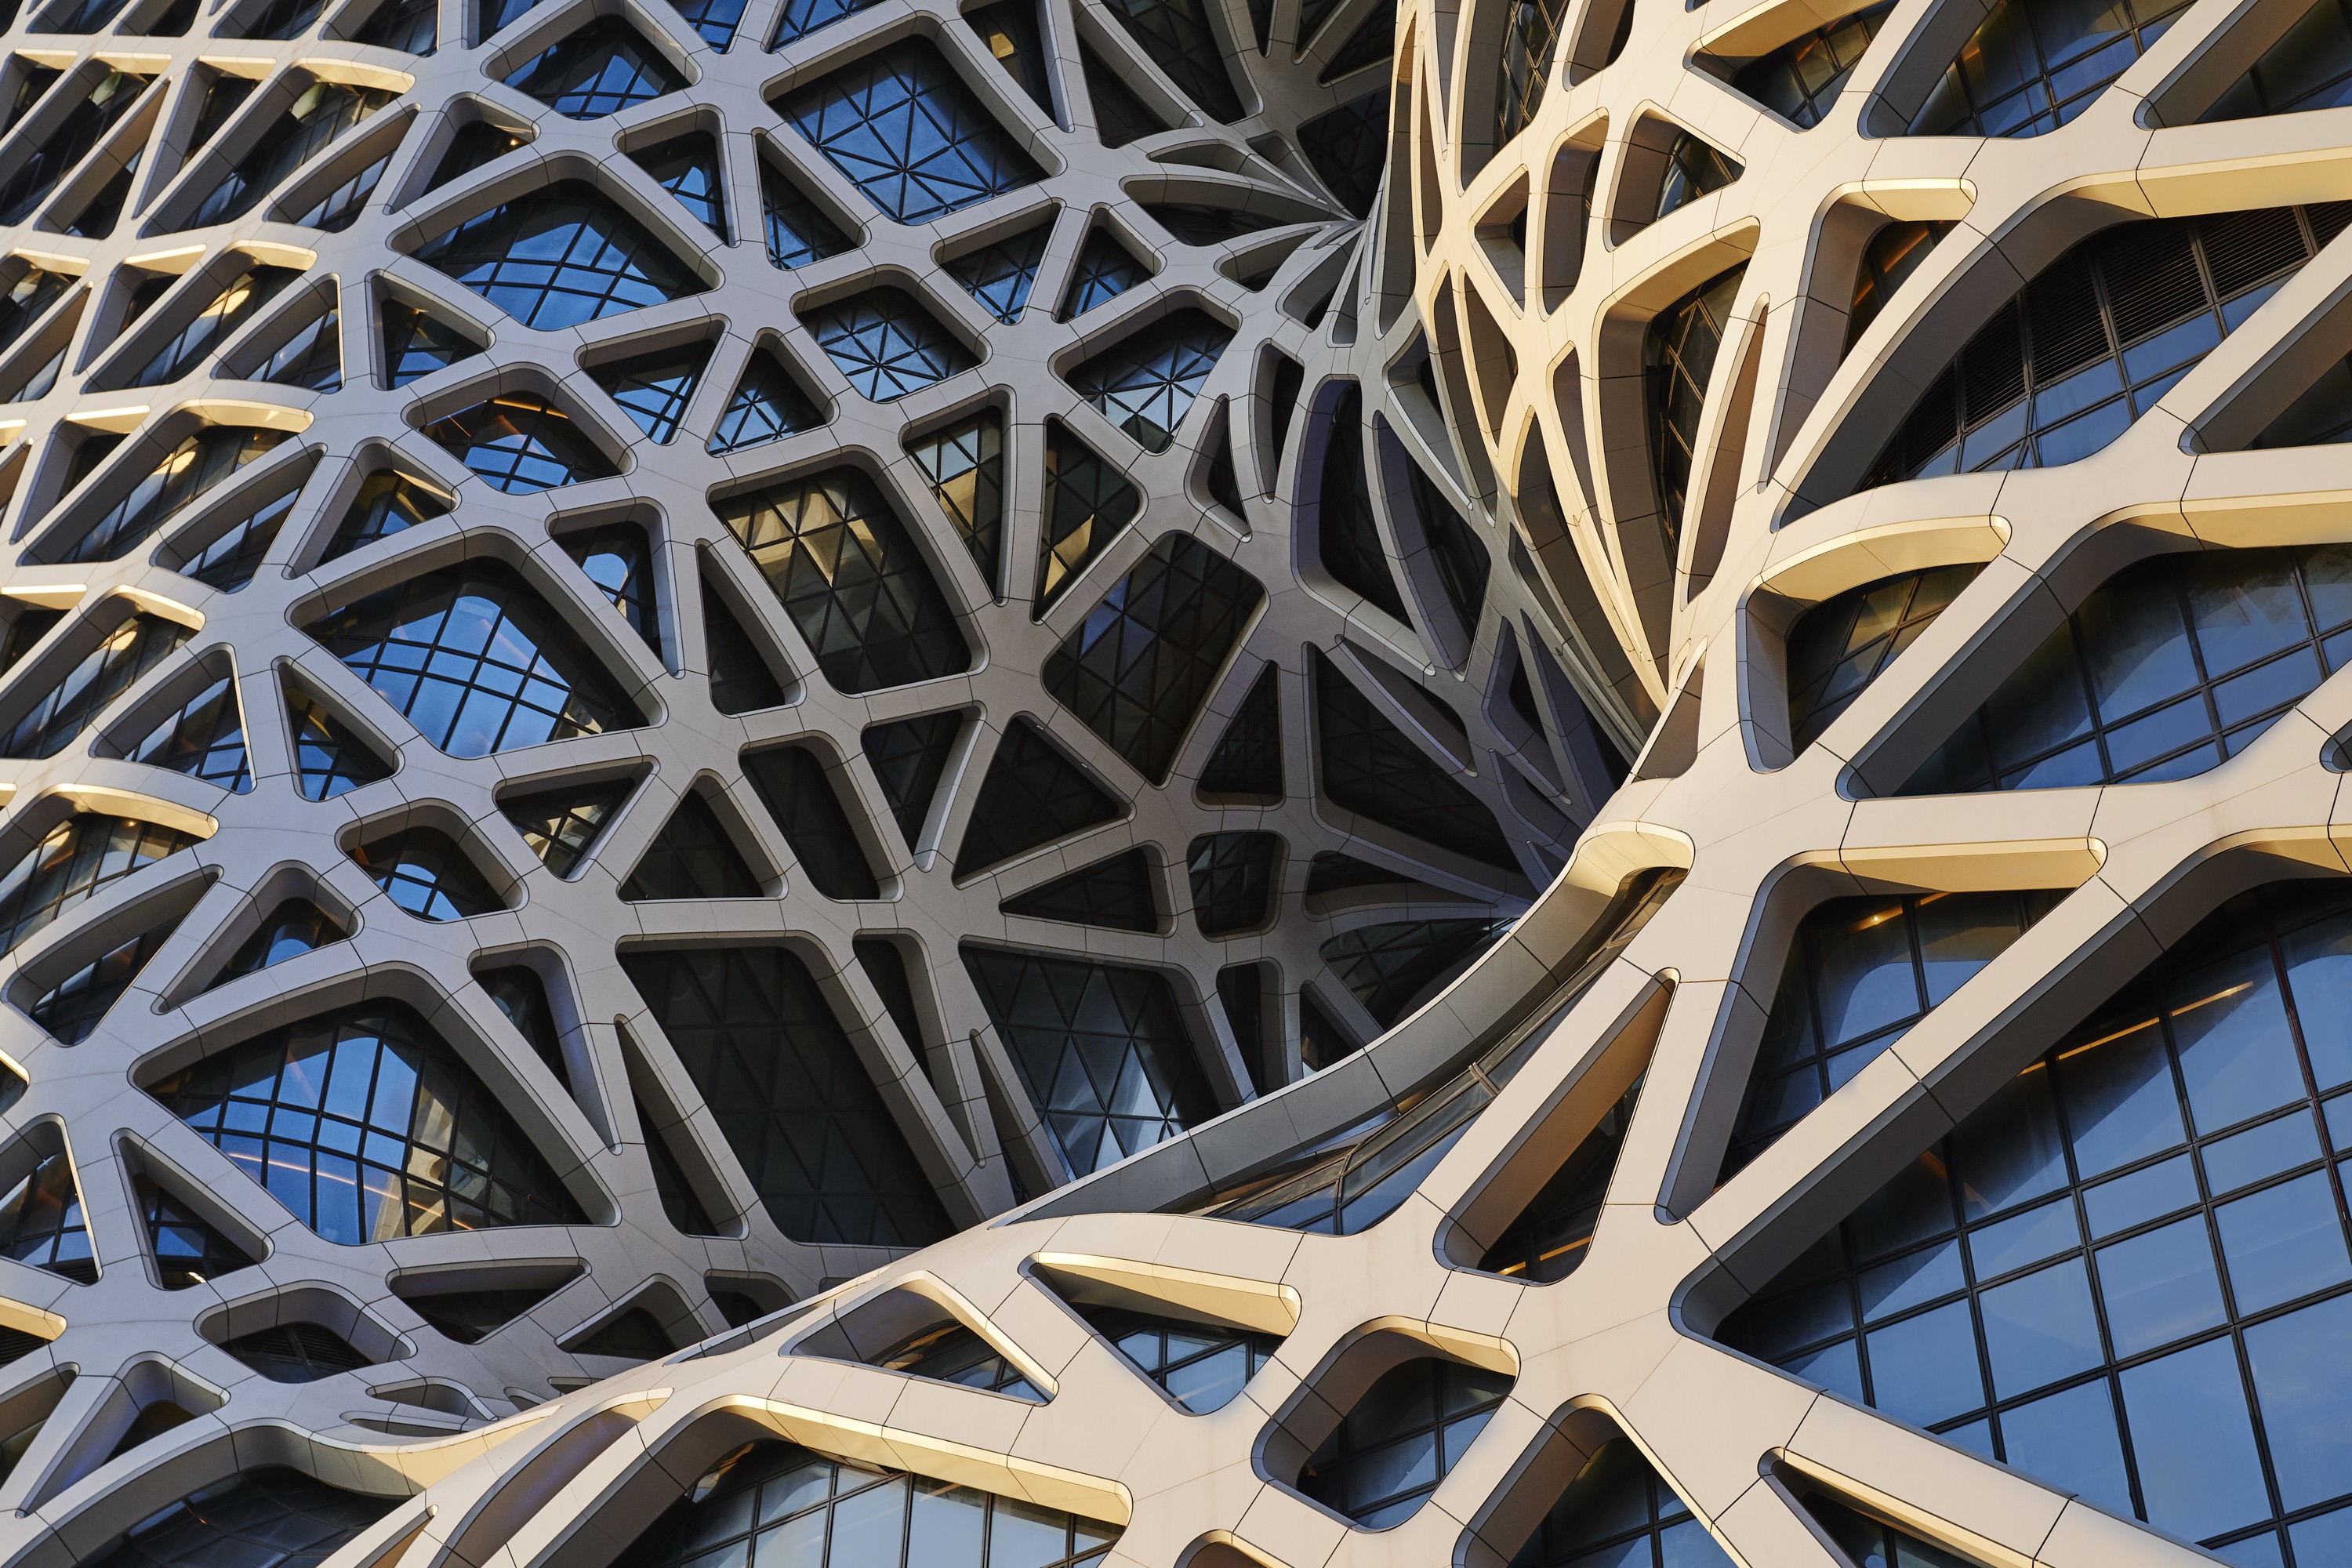 The Morpheus hotel’s futuristic-looking design – which boasts the world’s first free-form exoskeleton – has carved out its own distinctive visual identity, while accommodating 780 ultra-luxurious hotel rooms and a VIP casino